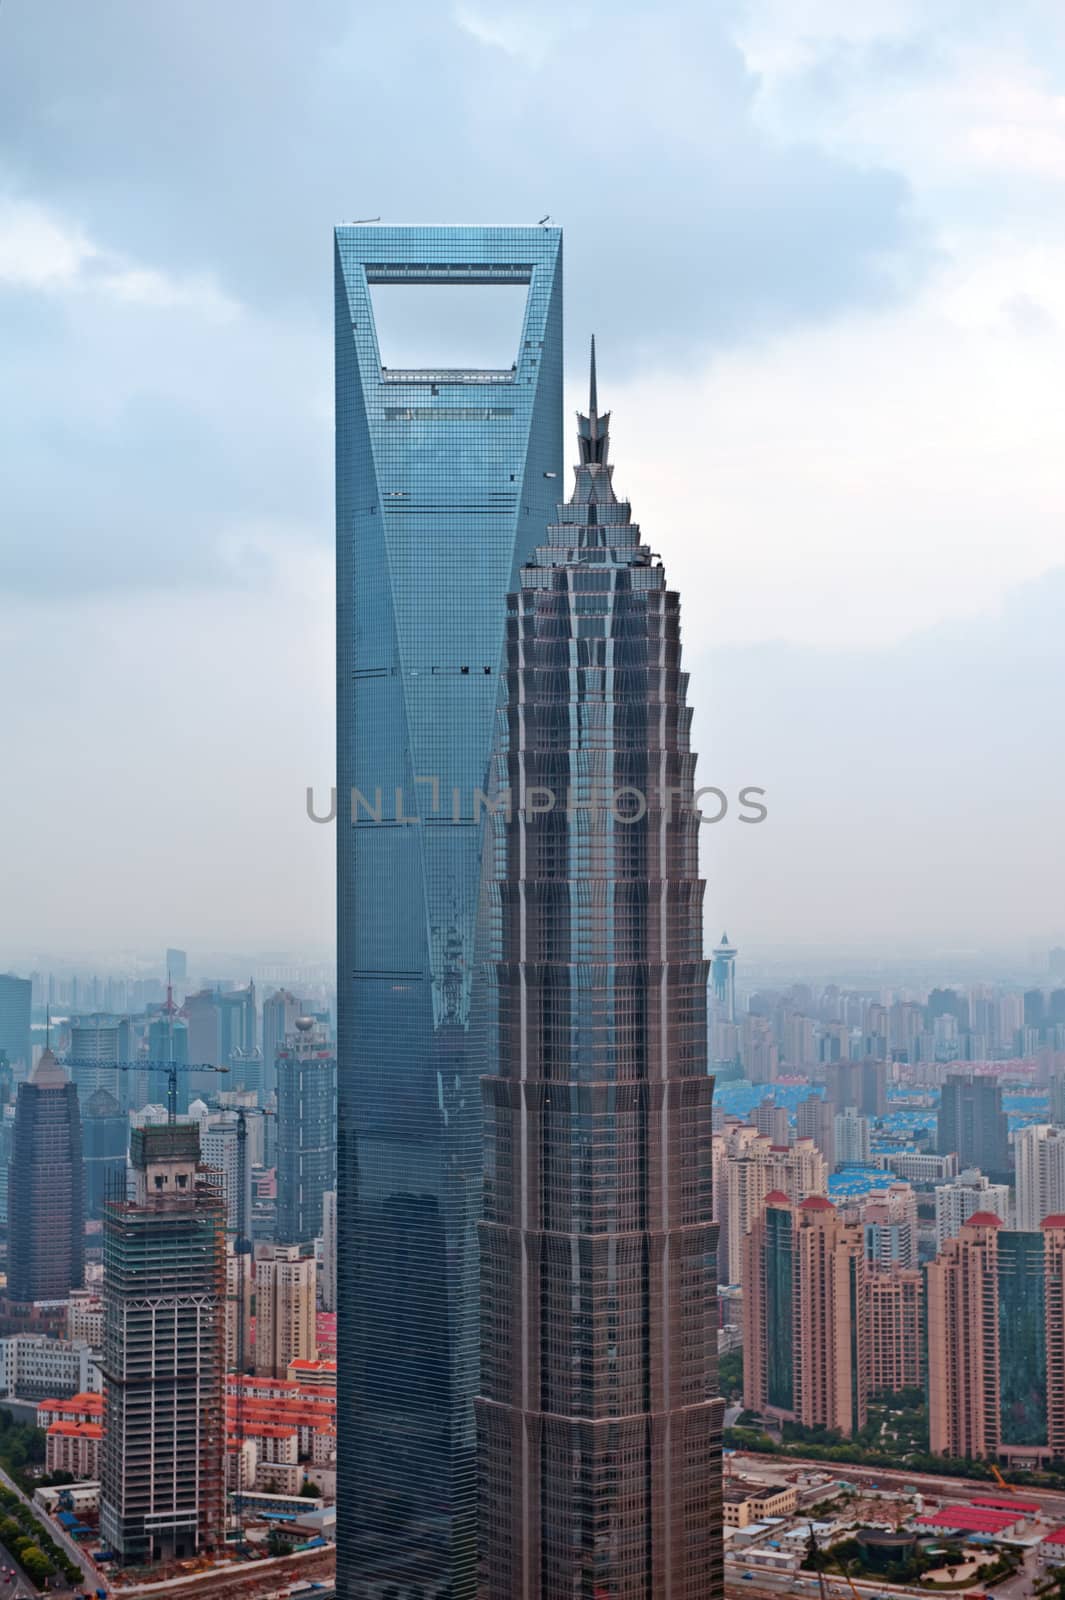 Jin Mao Tower and Shanghai World Financial Center 
Location: Pudong District, Shanghai, China
